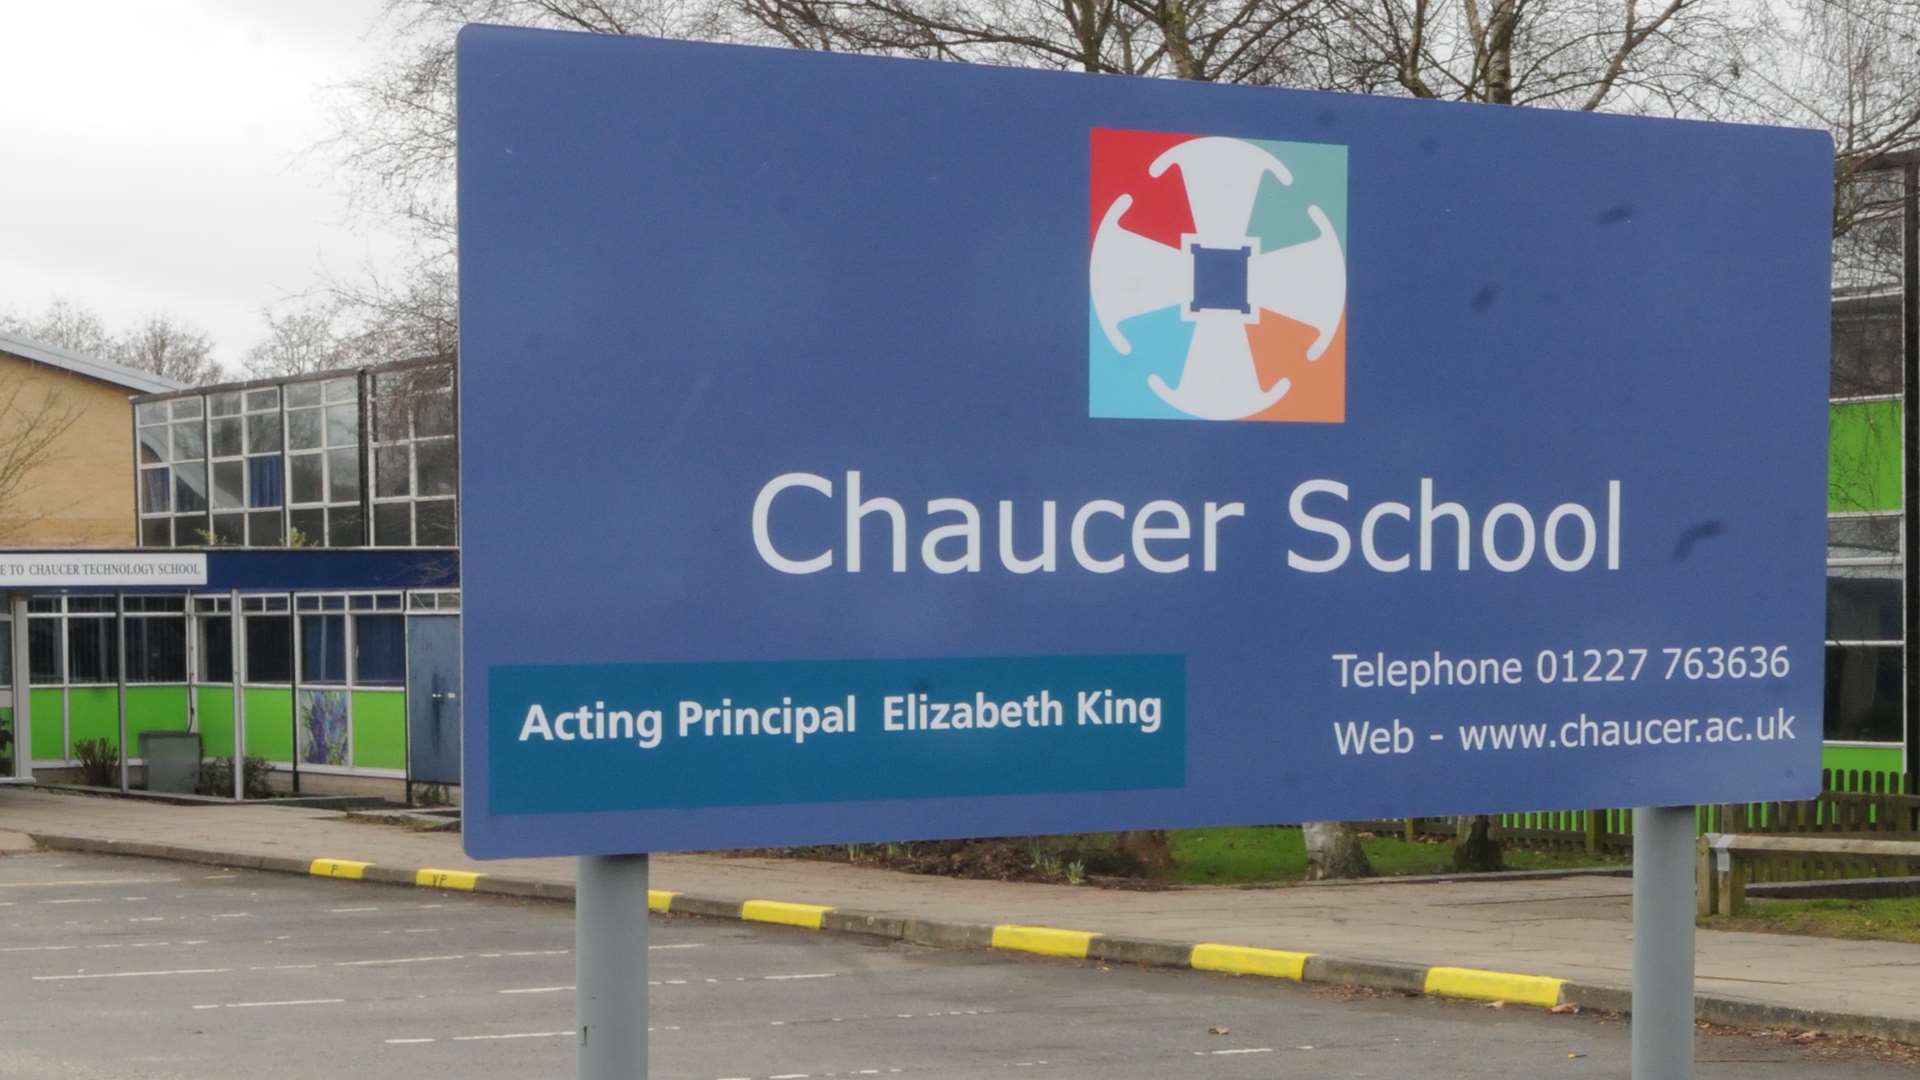 The Chaucer school has now closed